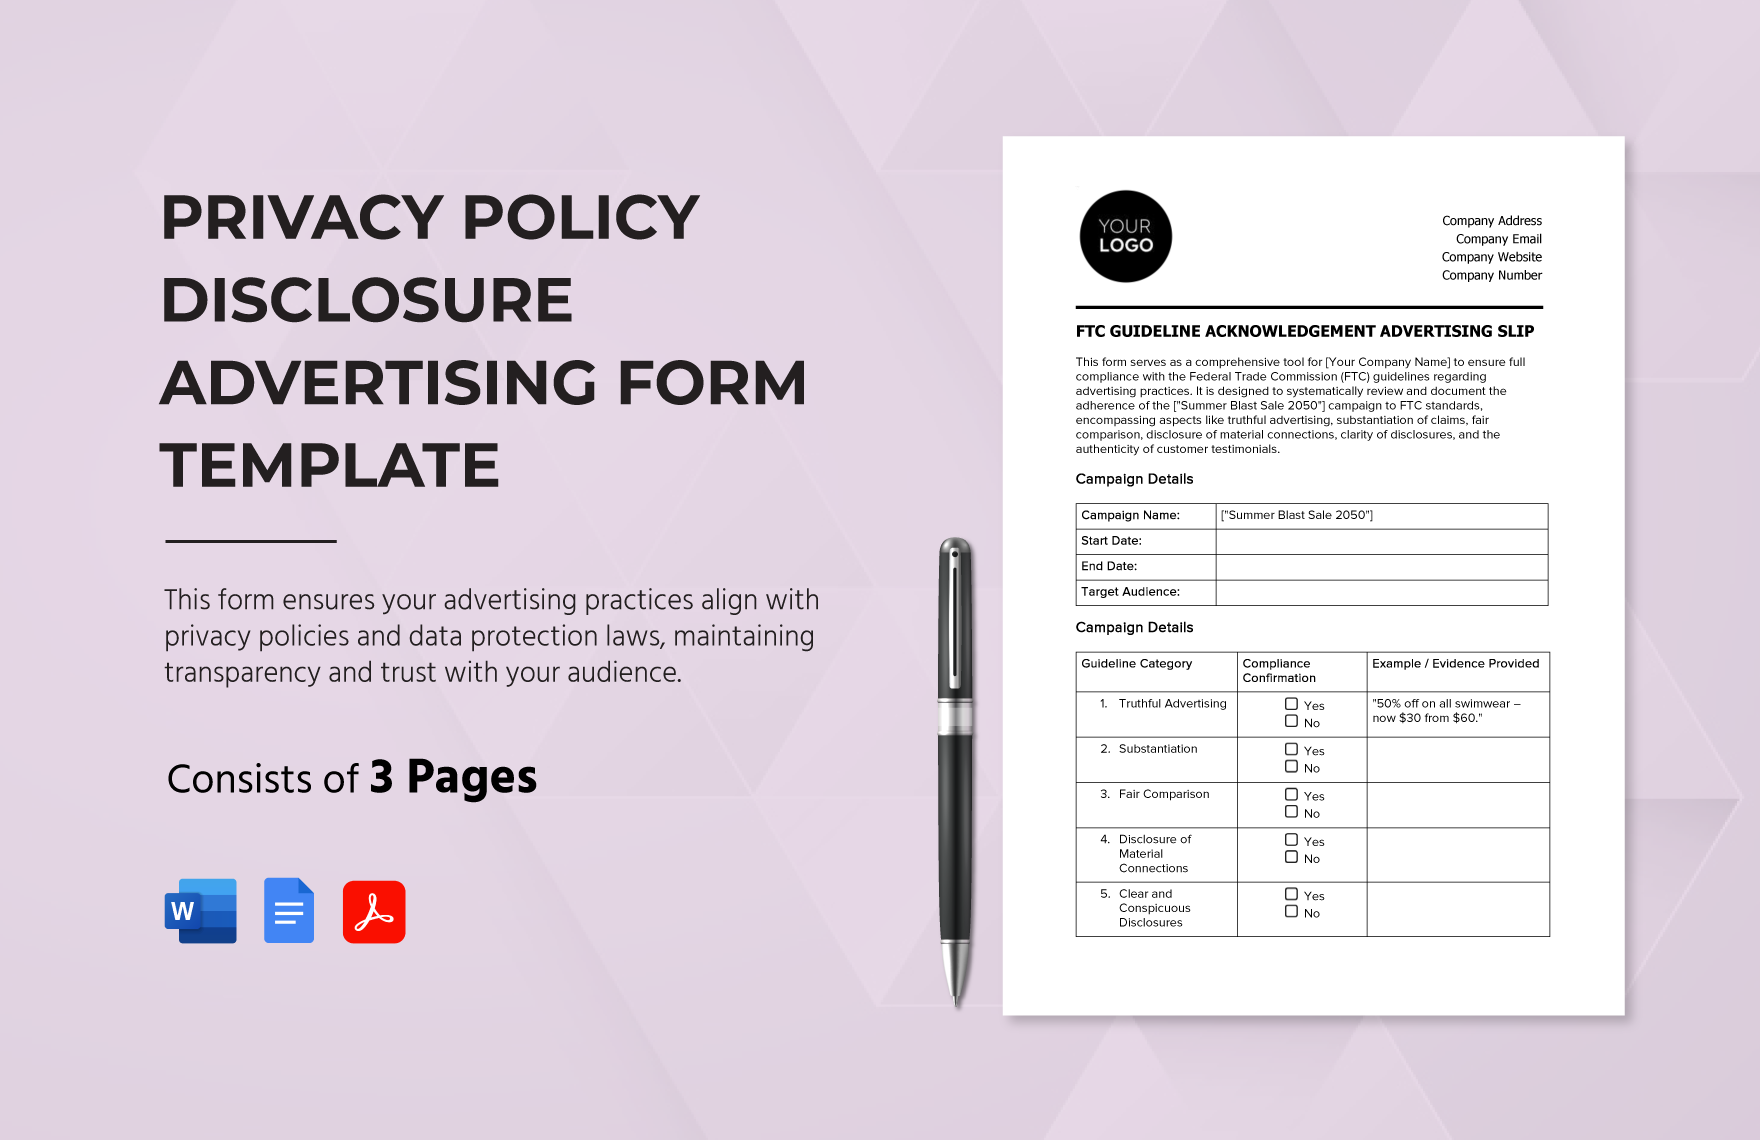 Privacy Policy Disclosure Advertising Form Template in Word, Google Docs, PDF